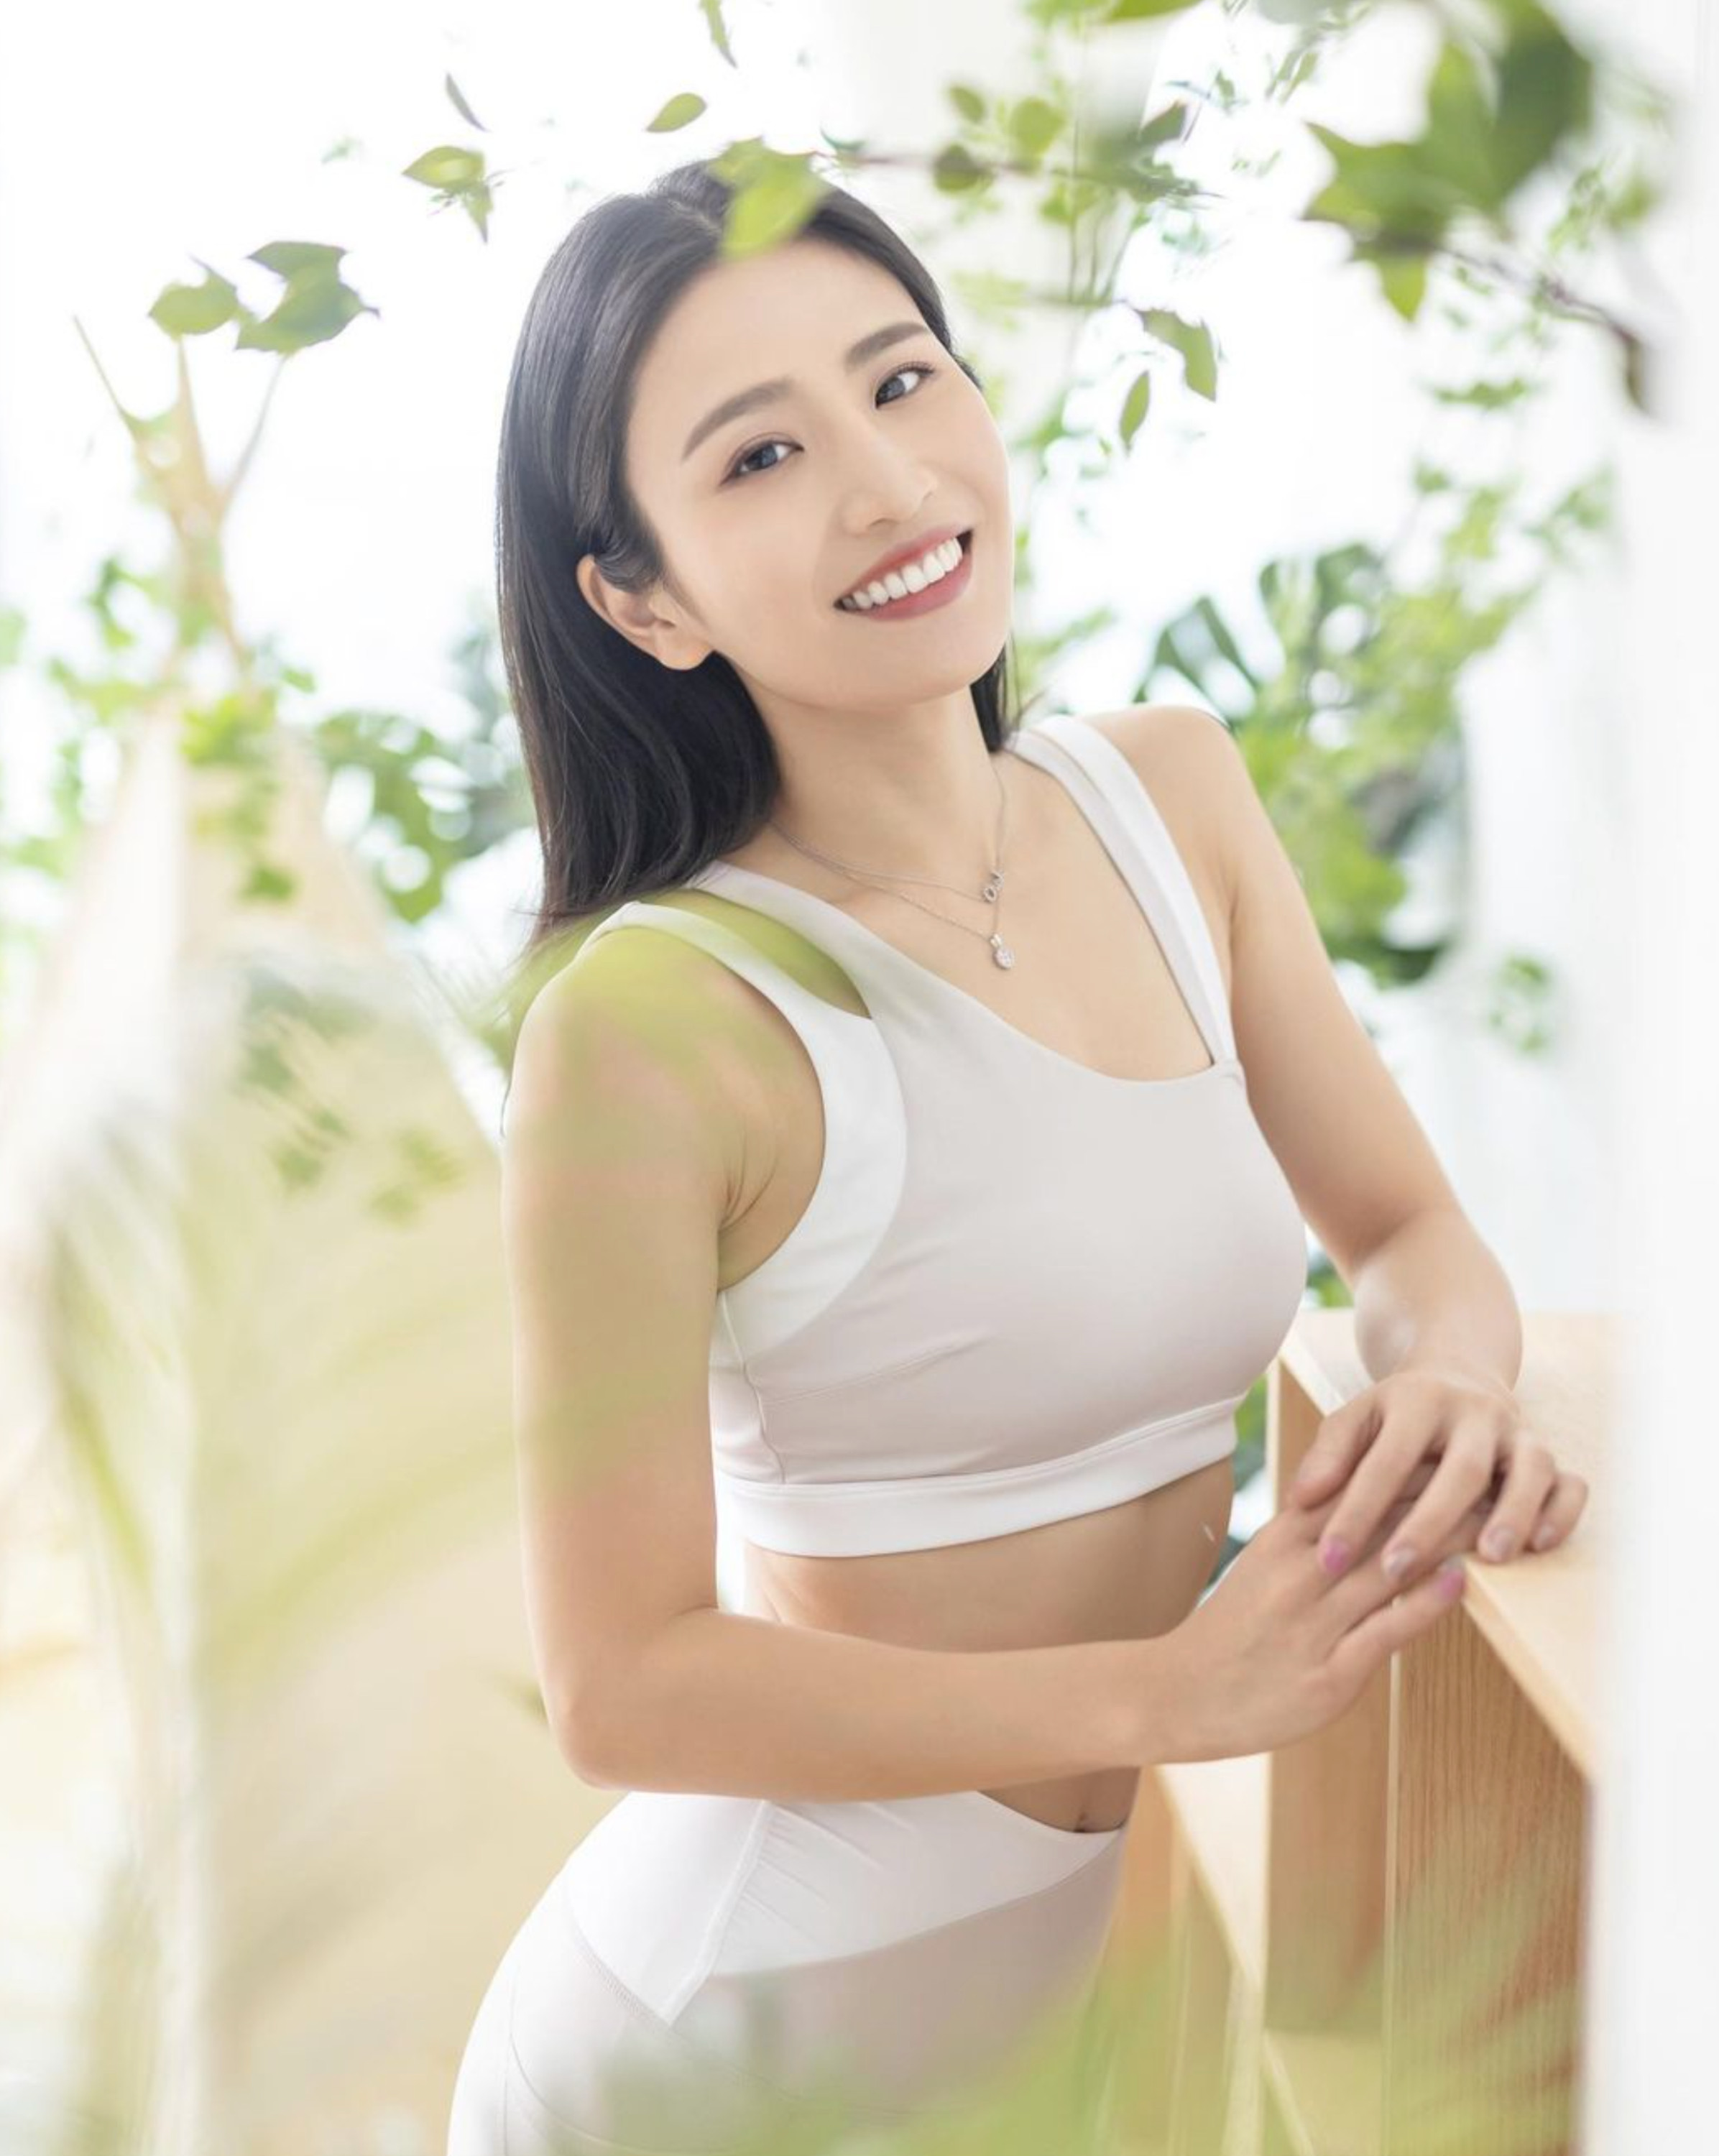 Coffee Lam rose to fame during the pandemic through YouTube and fitness wear brand CoffeeSweat. Photo: @coffee89921/Instagram